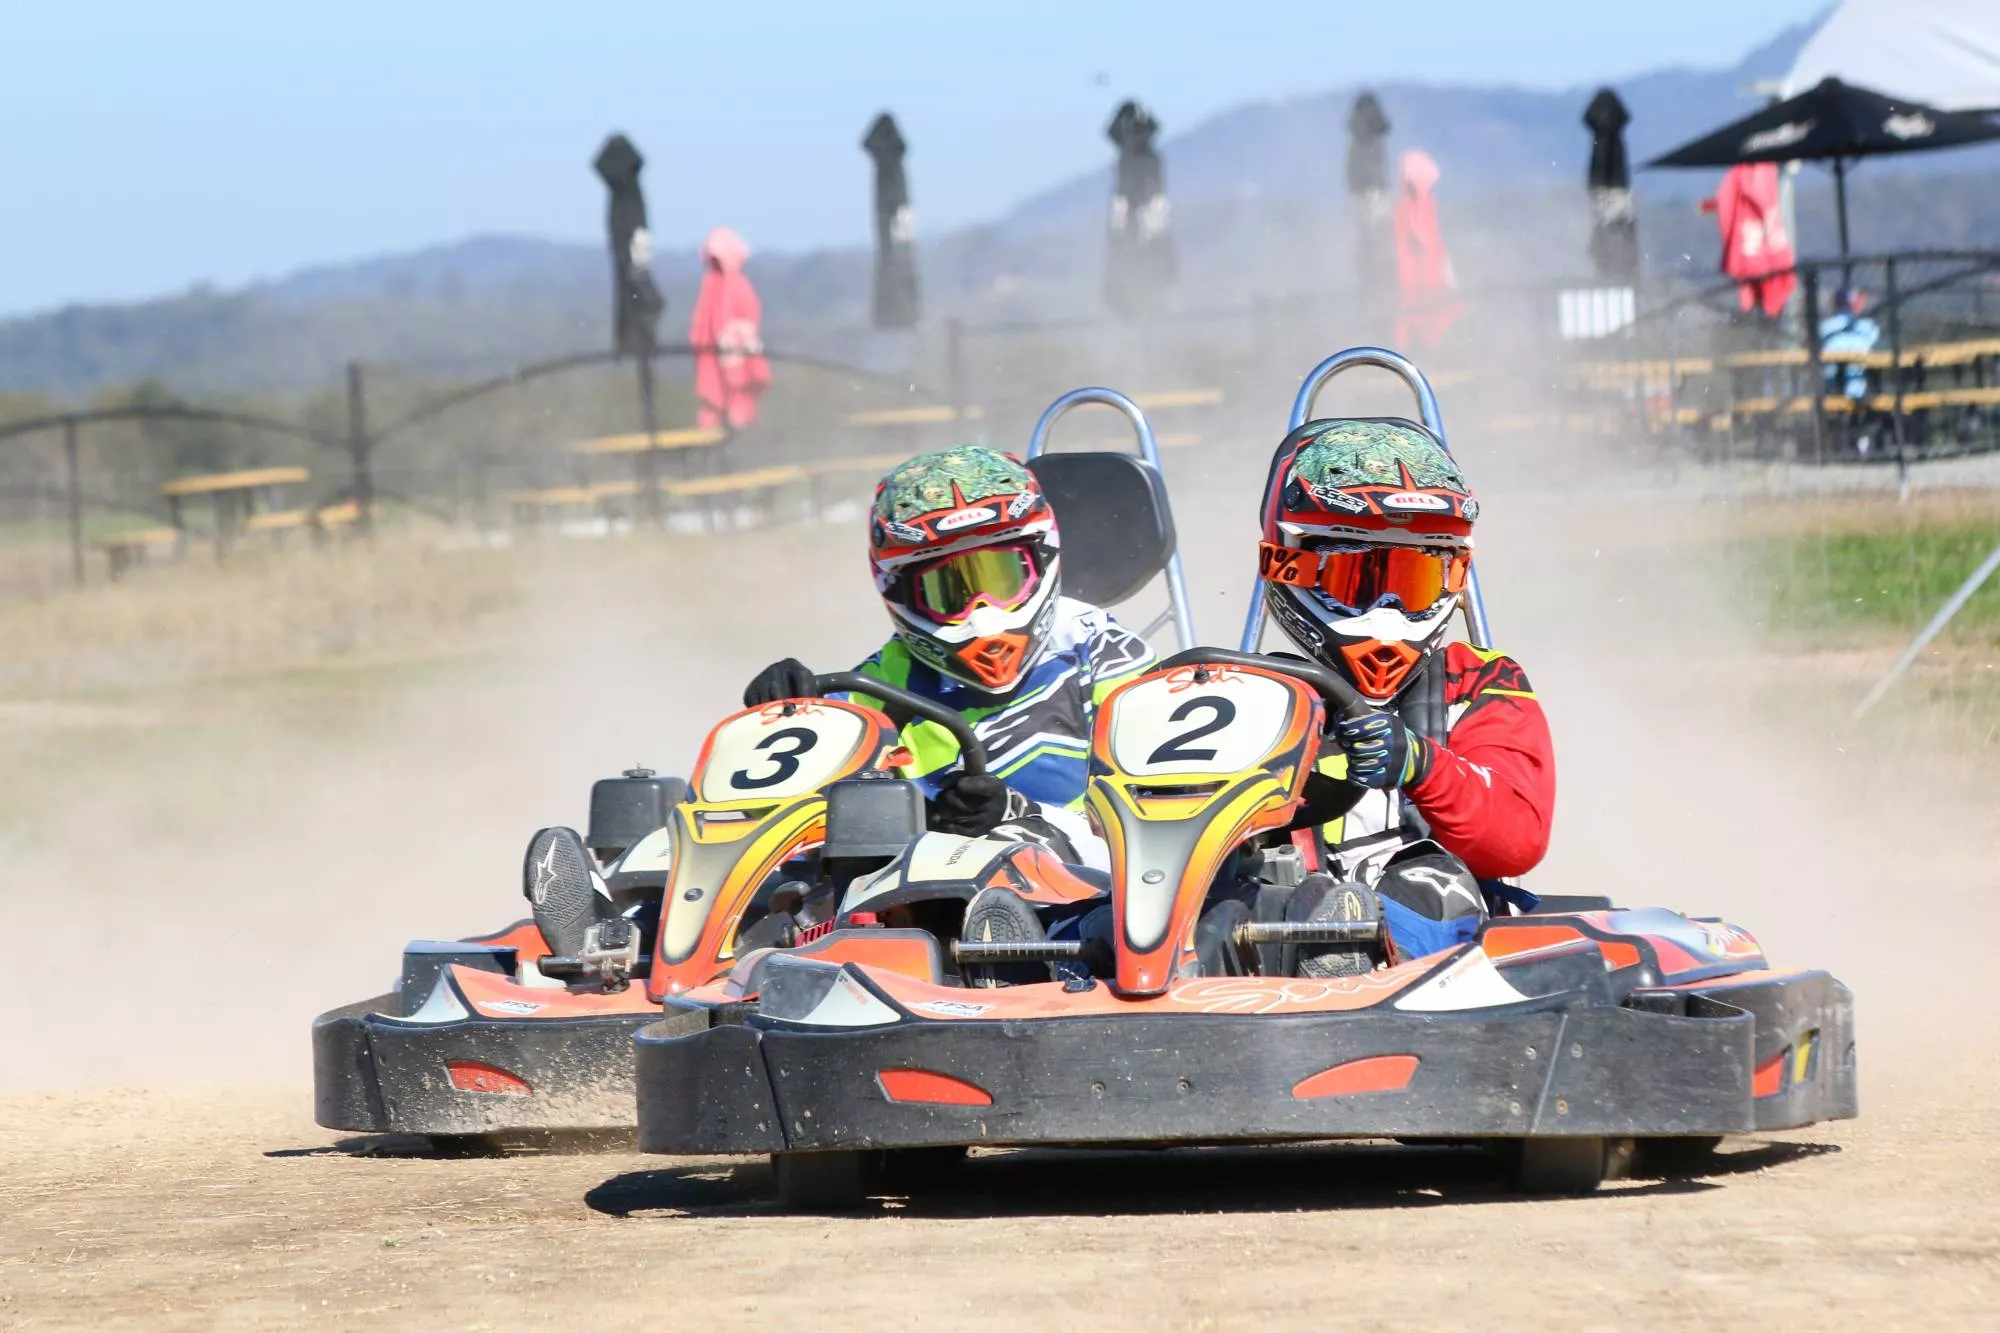 Xtreme Go-Karts in USA, North America | Karting - Rated 4.3